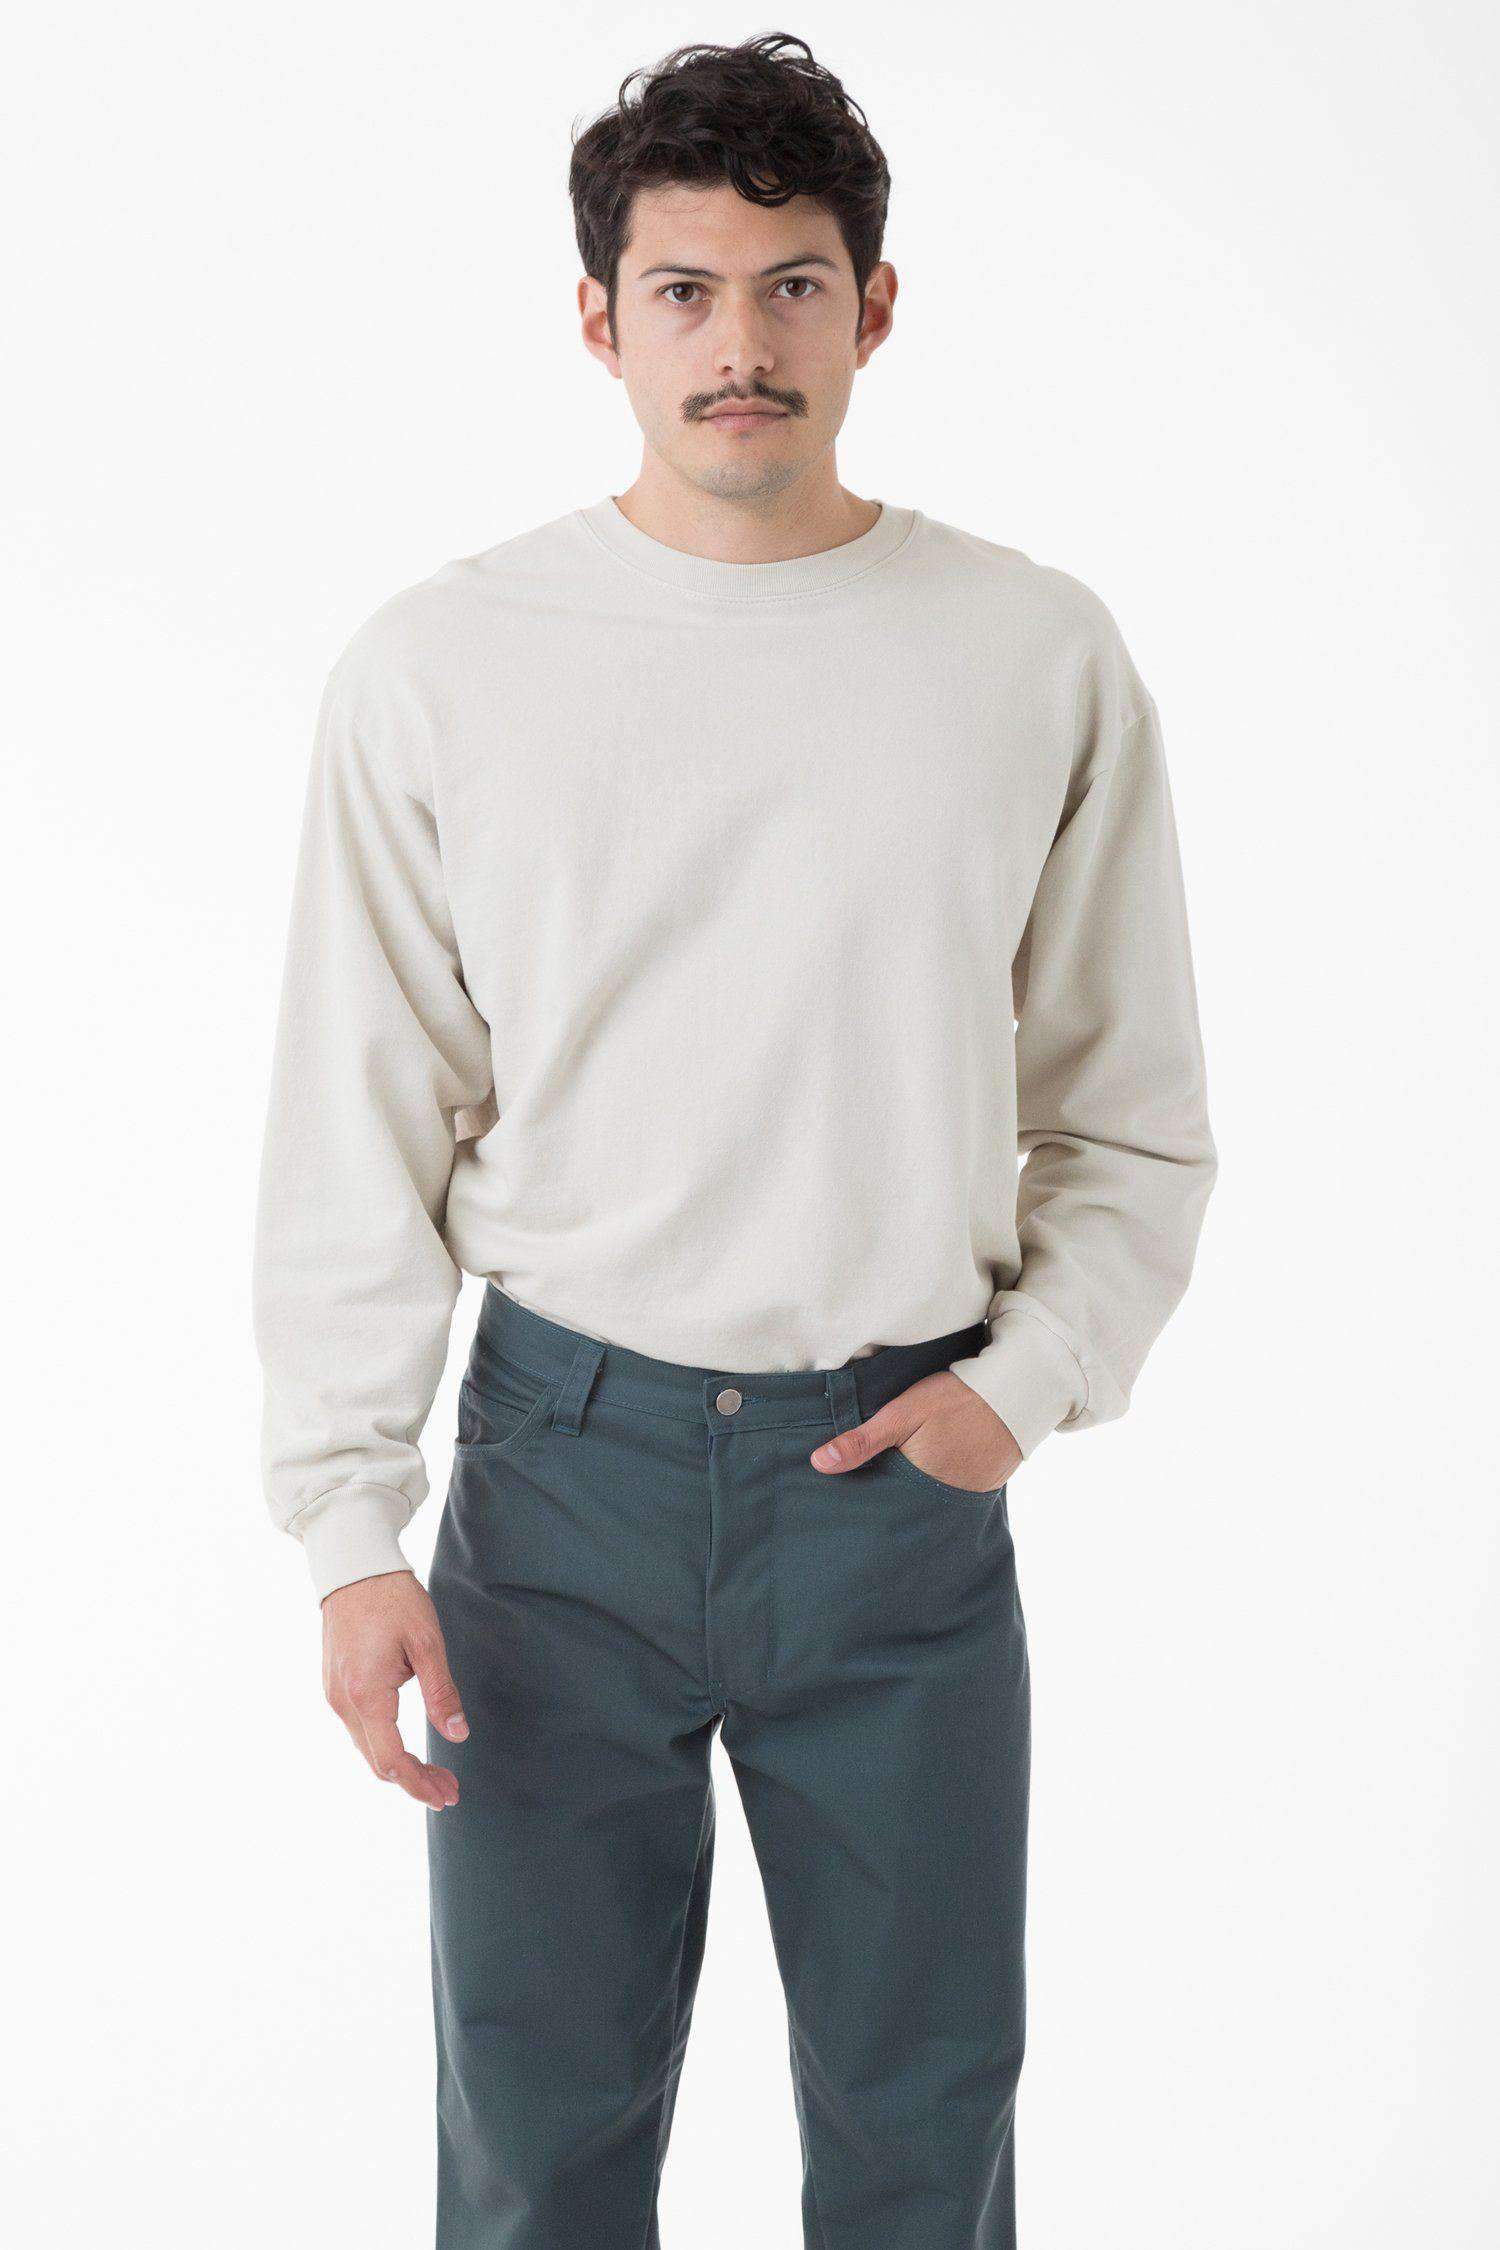 MWT07GD - Long Sleeve Garment Dye French Terry Pullover Sweatshirt Los Angeles Apparel Cement XS 